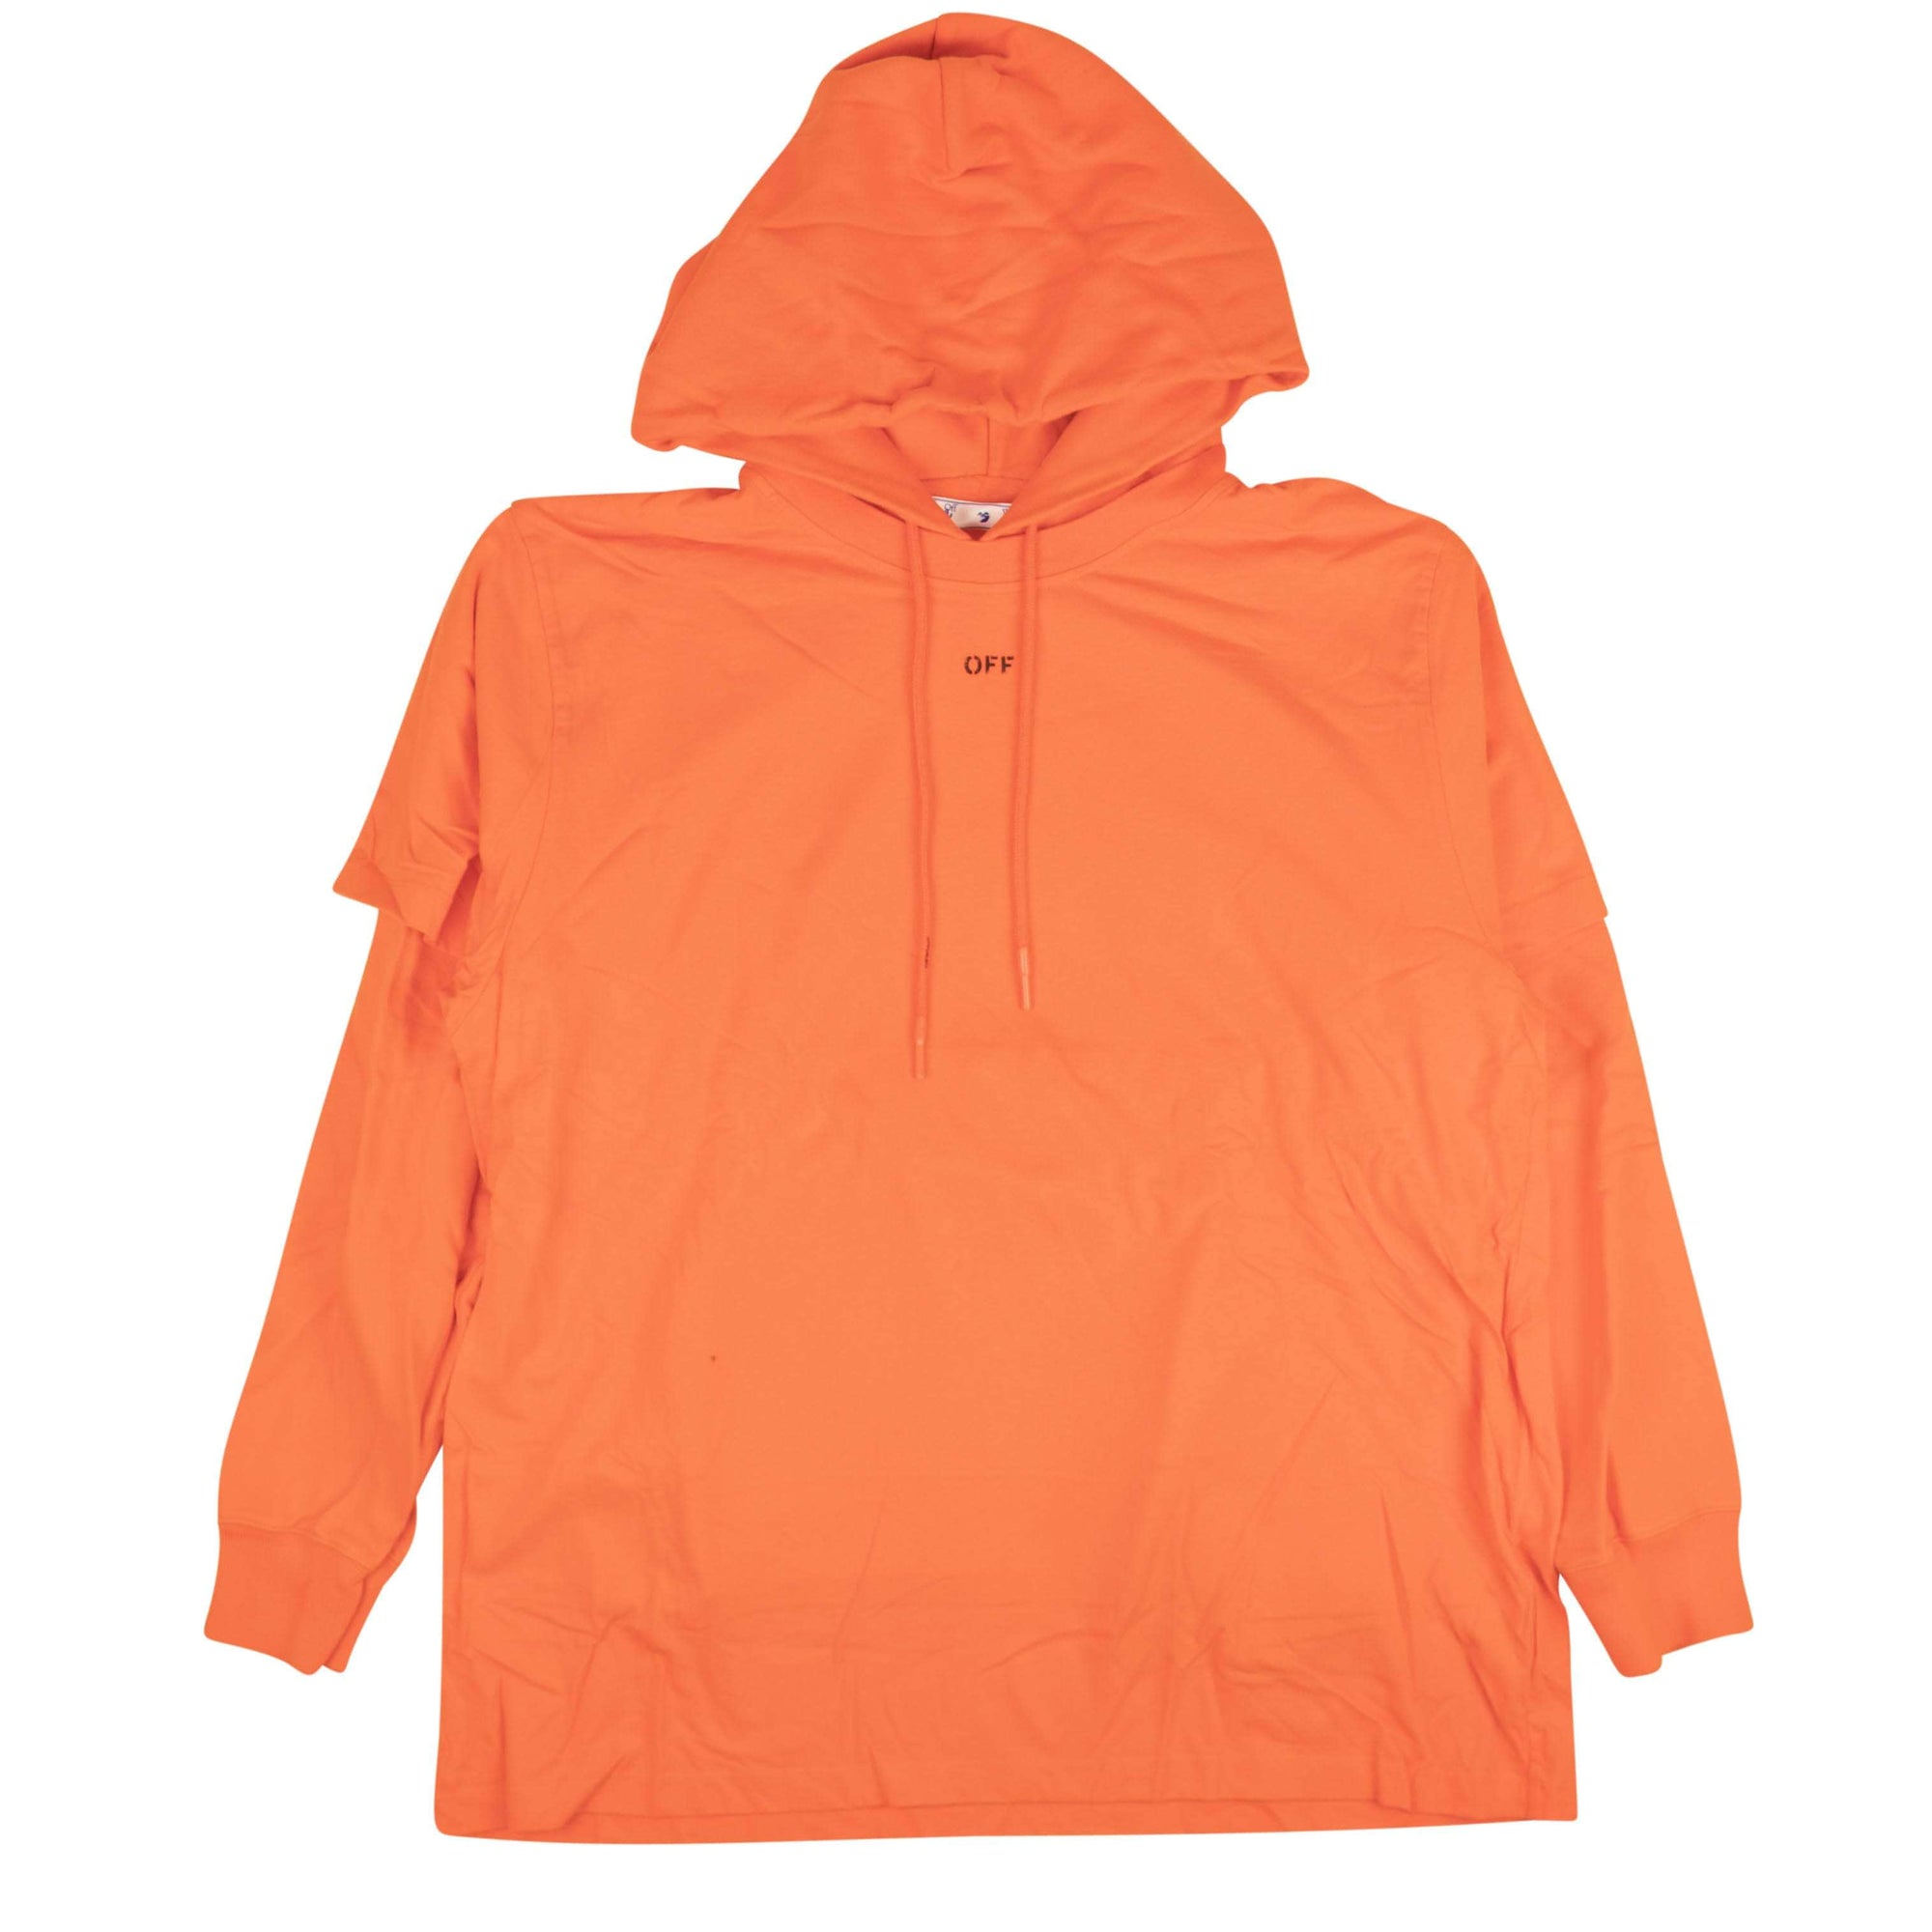 OFF-WHITE c/o VIRGIL ABLOH 250-500, channelenable-all, chicmi, couponcollection, gender-mens, main-clothing, mens-shoes, off-white-c-o-virgil-abloh, OWM, size-l, size-m, size-s S Orange Stencil Double Tee Hoodie 95-OFW-1438/S 95-OFW-1438/S